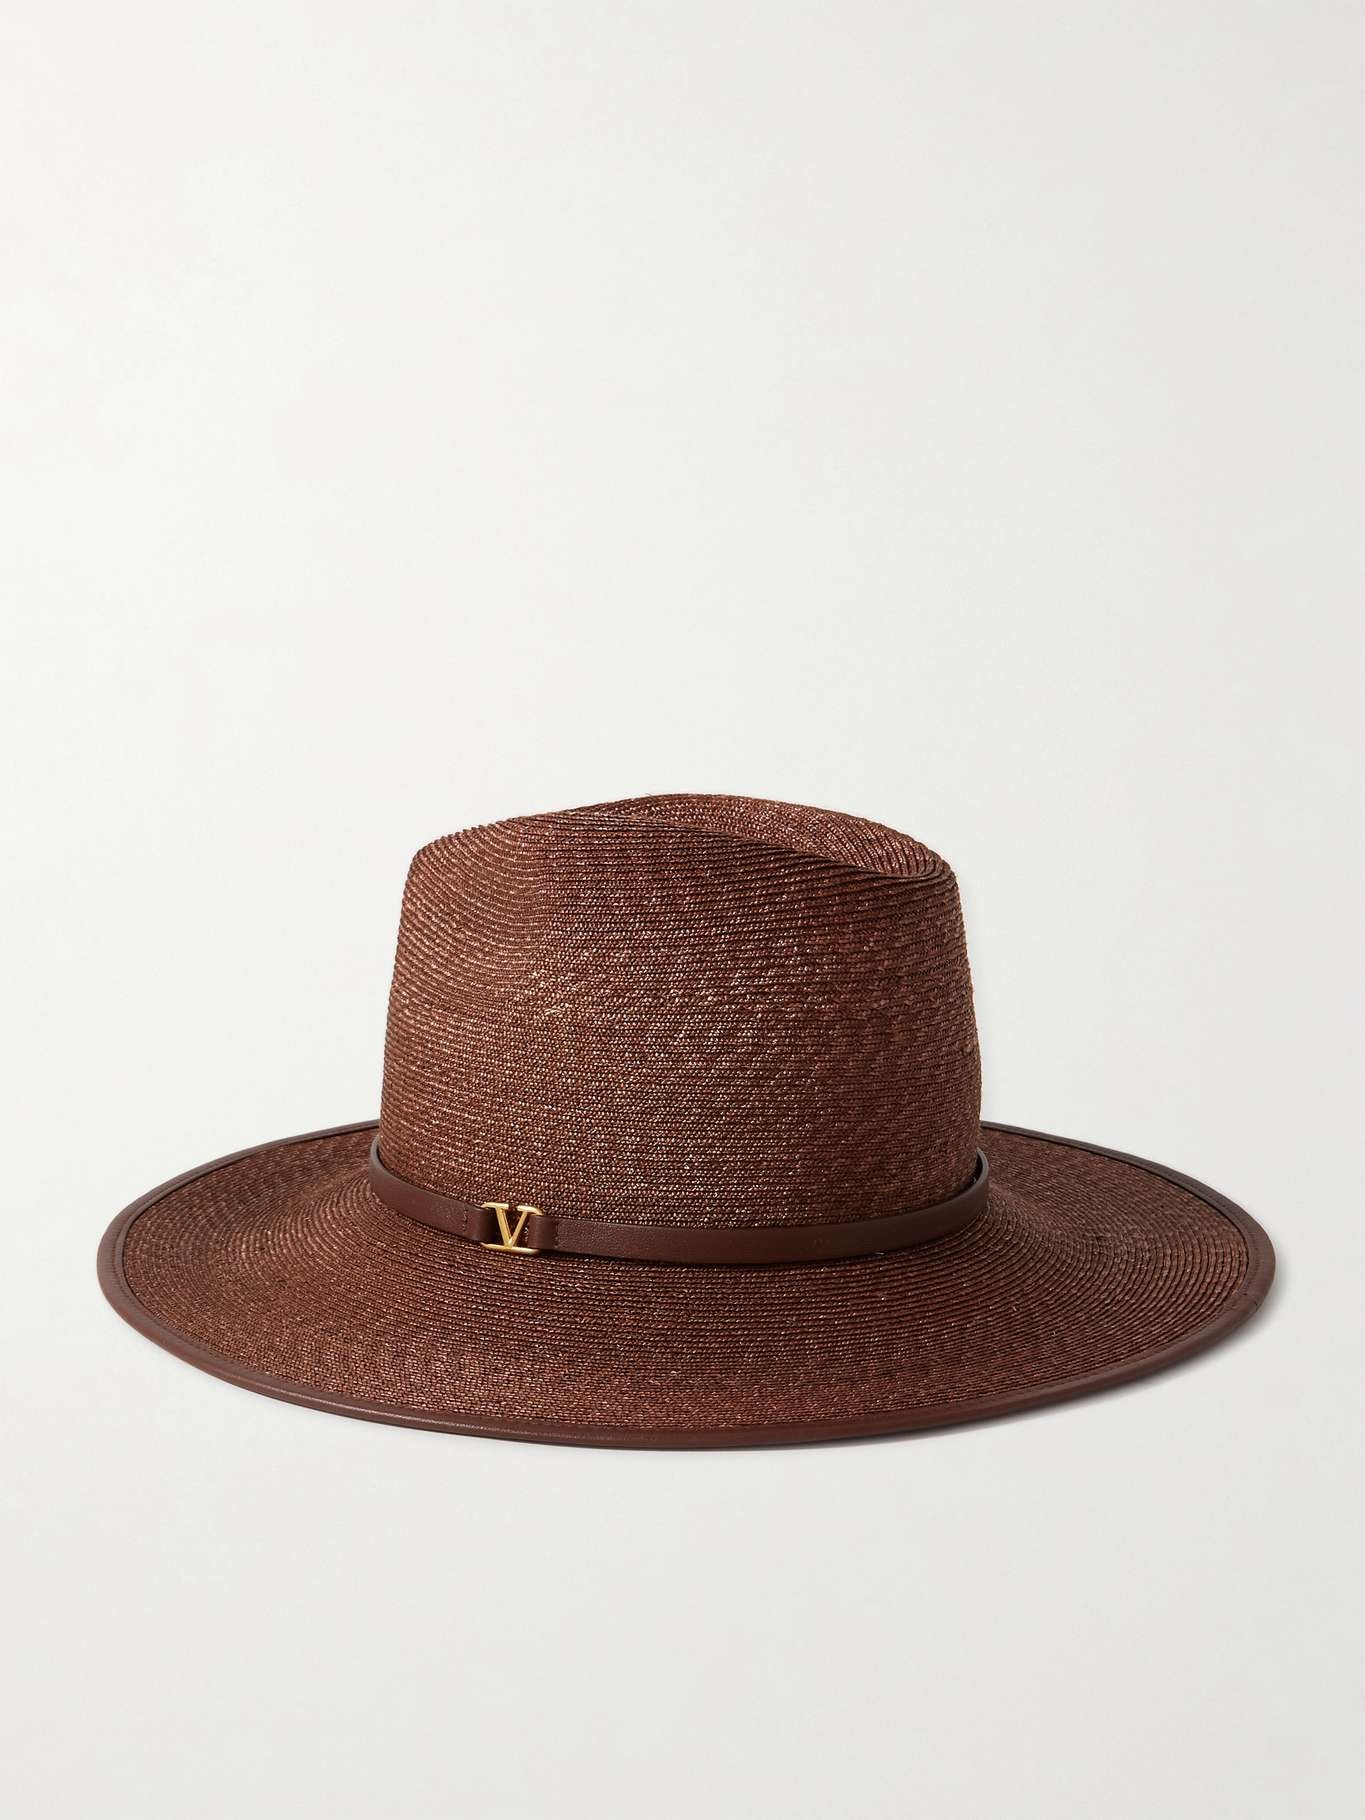 VLOGO leather-trimmed straw sunhat - 1